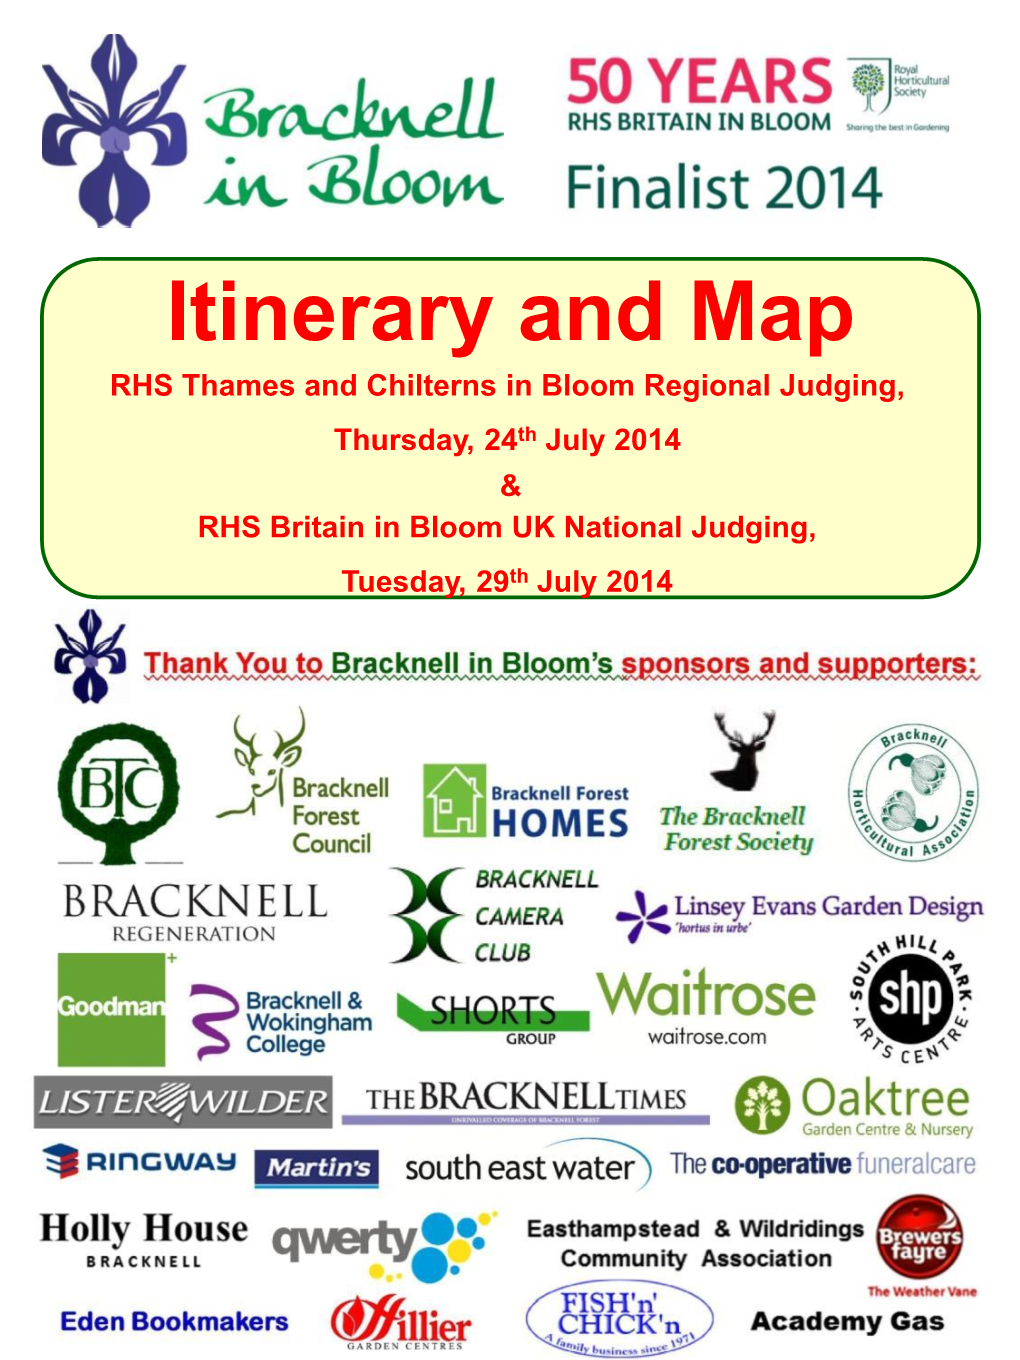 Itinerary and Map RHS Thames and Chilterns in Bloom Regional Judging, Thursday, 24Th July 2014 & RHS Britain in Bloom UK National Judging, Tuesday, 29Th July 2014